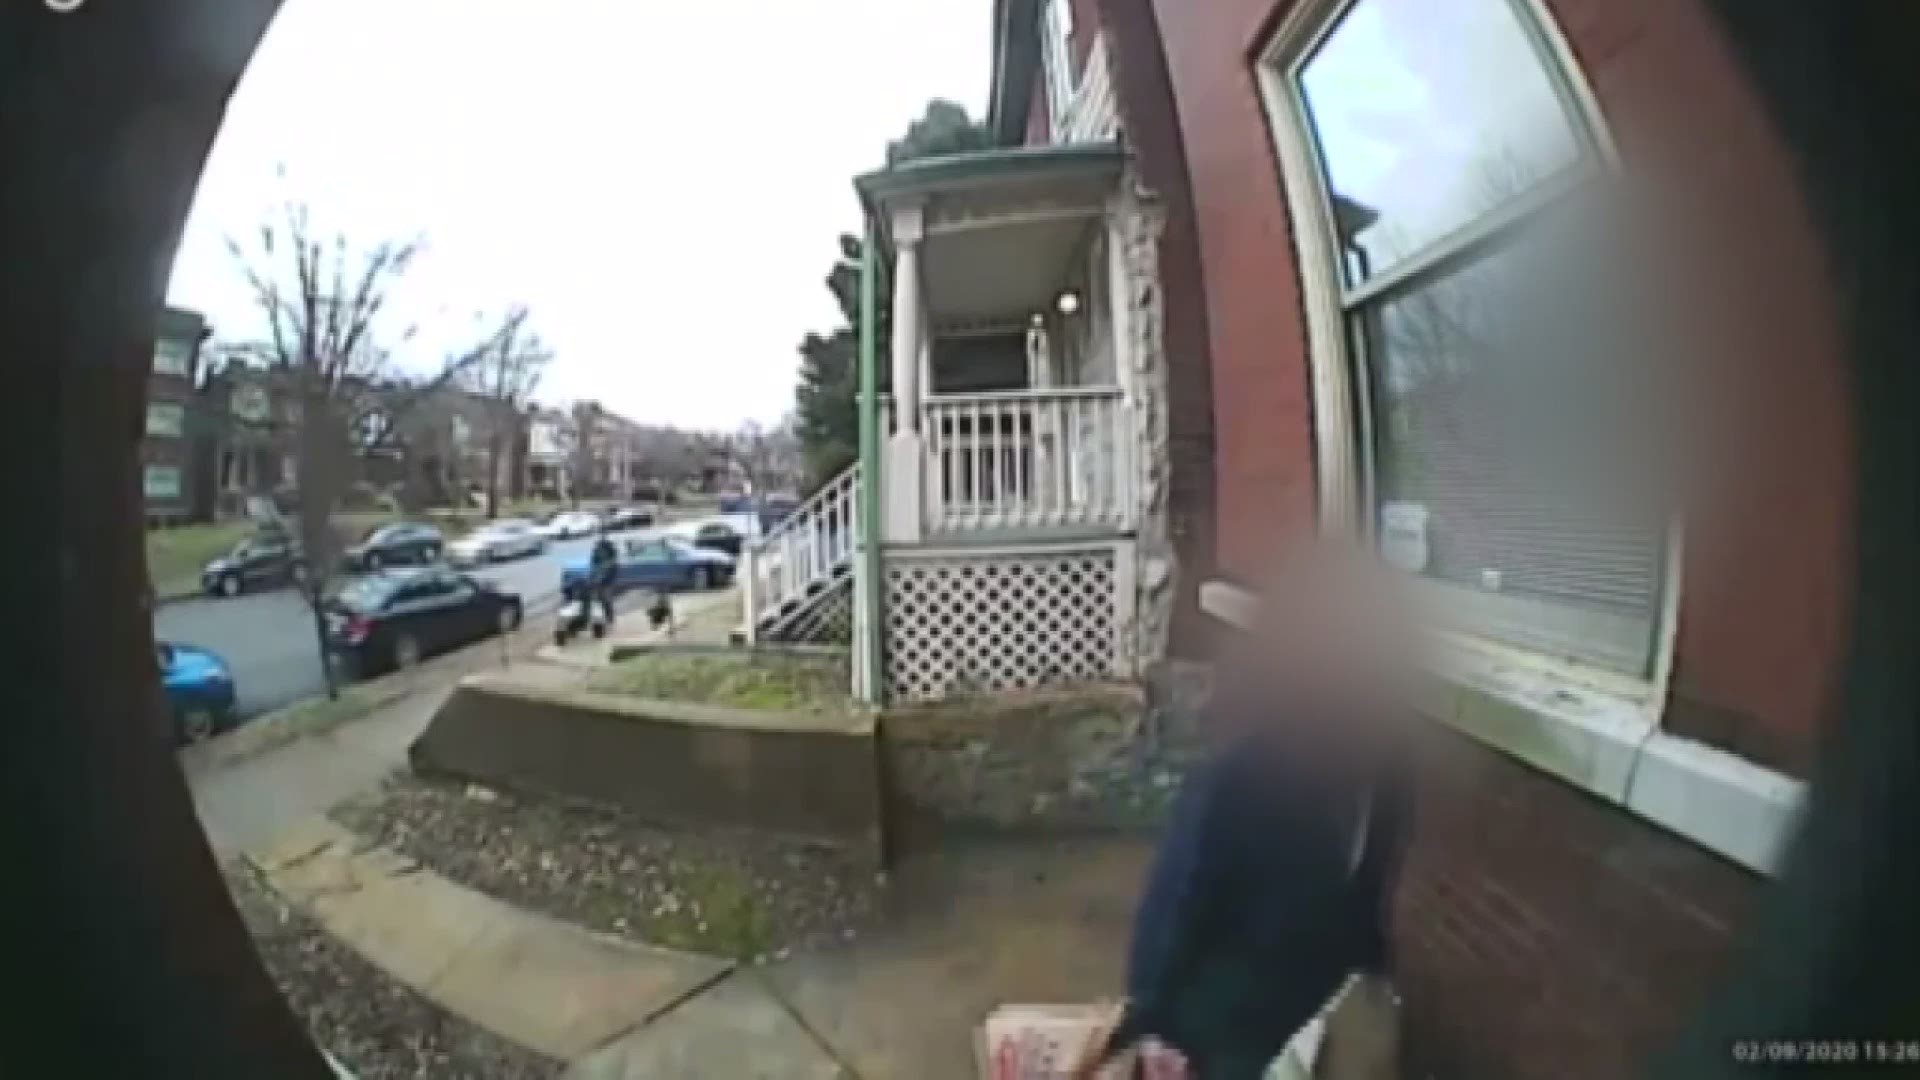 Raw Video: Delivery driver's car stolen in Shaw